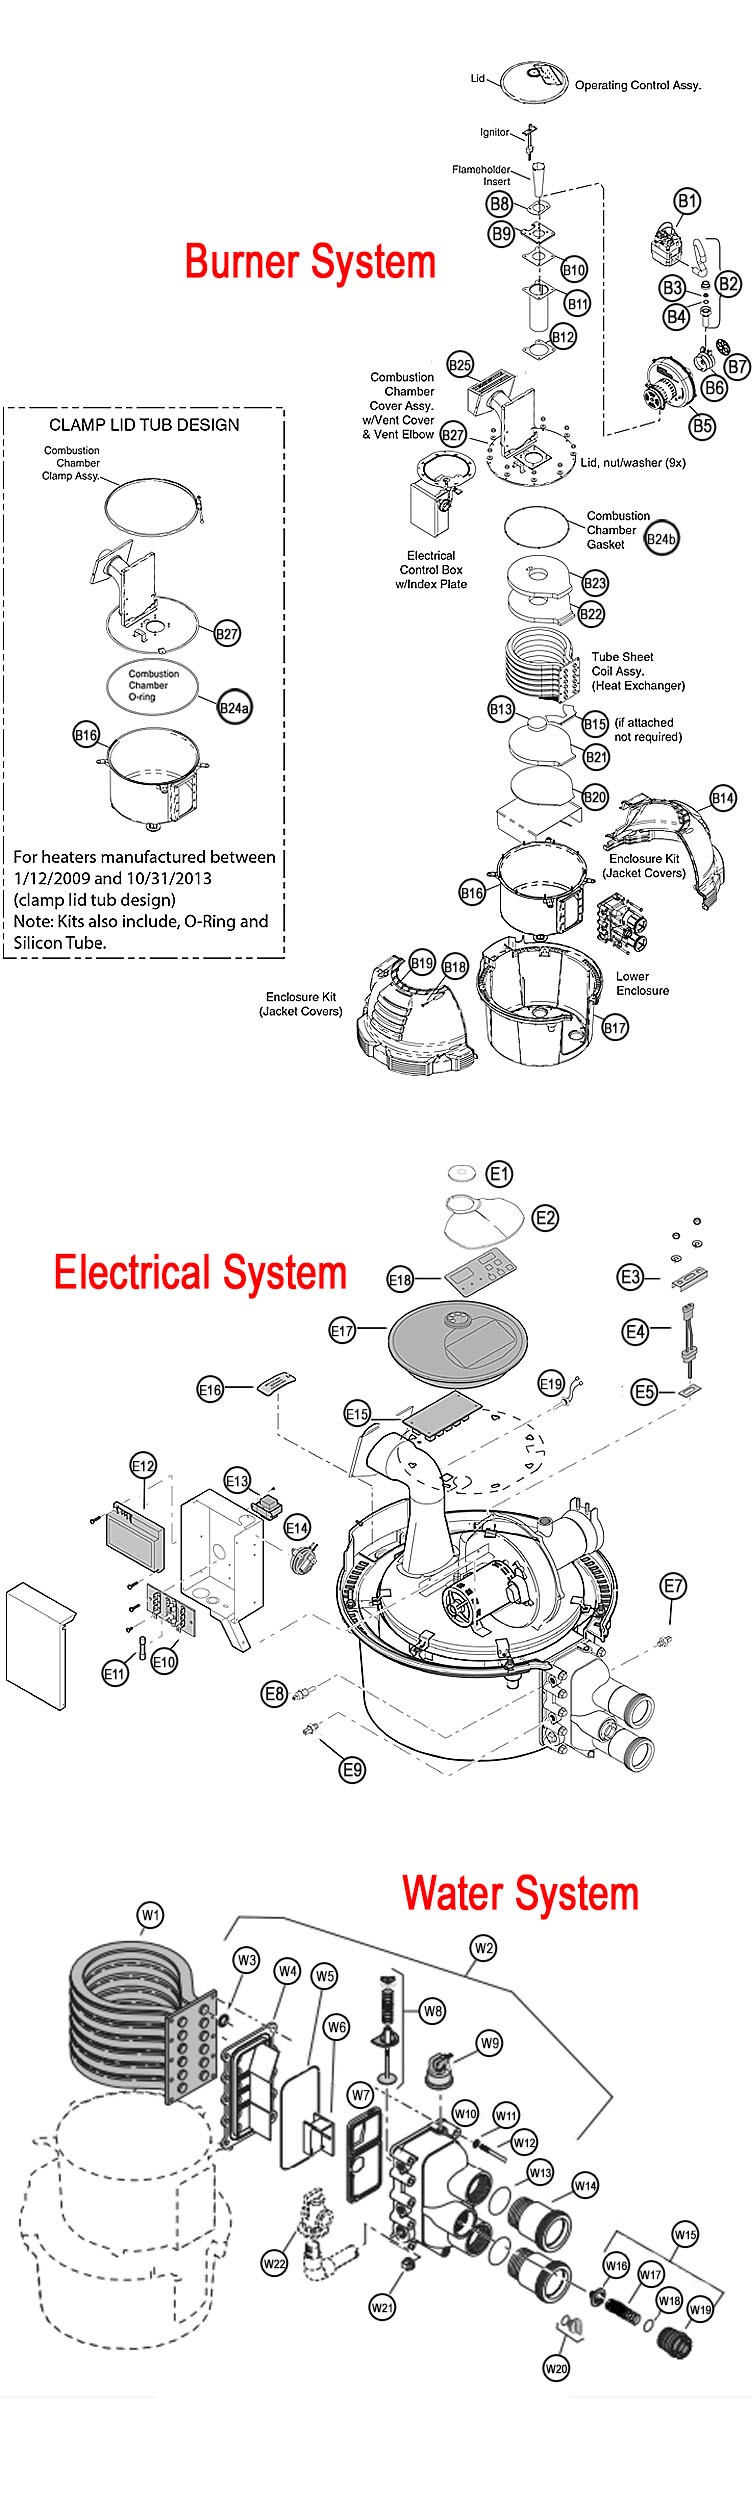 Sta-Rite Max-E-Therm Low NOx Commercial Swimming Pool Heater - Electronic Ignition - Propane - 250,000 BTU ASME - 460768 Parts Schematic